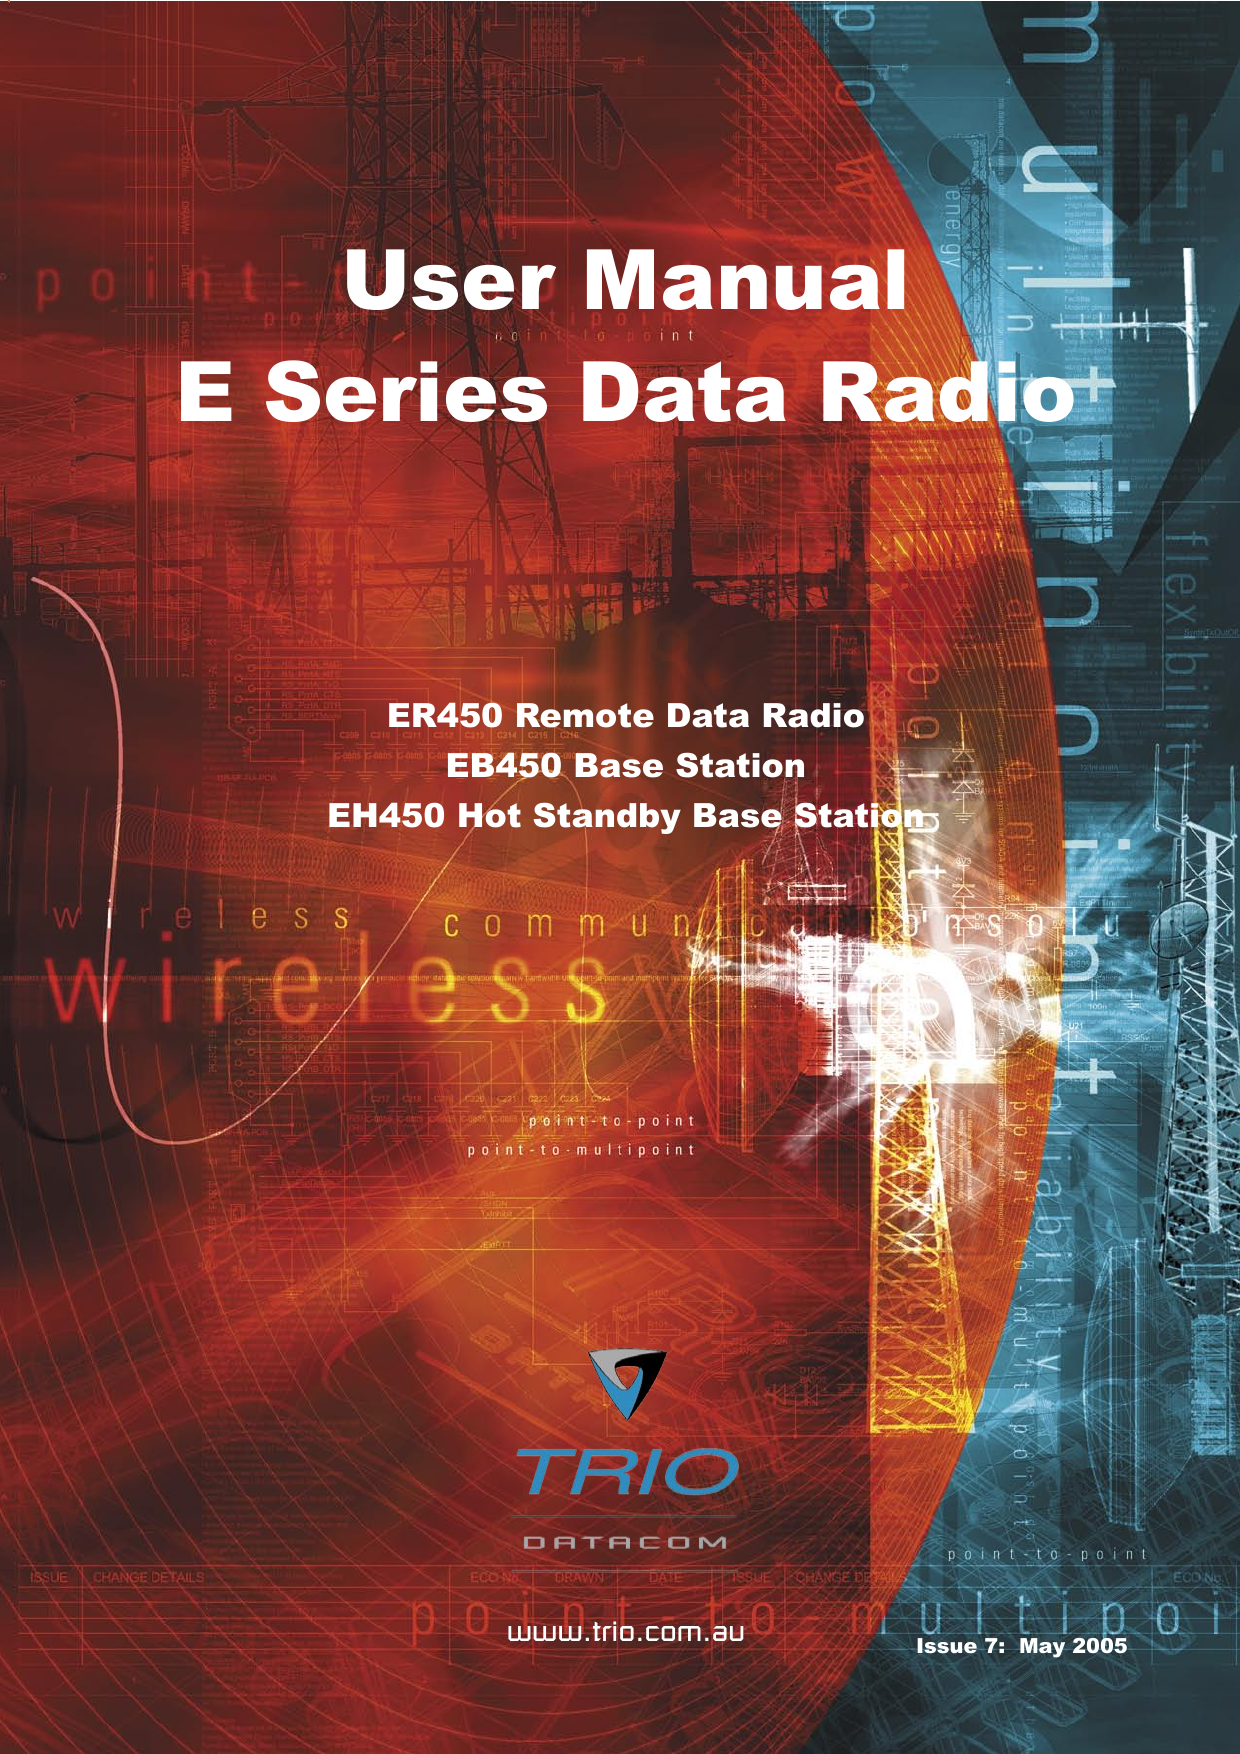 Page 1  E Series Data Radio – User Manual © Copyright 2005 Trio DataCom Pty. Ltd.User ManualE Series Data Radiowww.trio.com.auER450 Remote Data Radio EB450 Base StationEH450 Hot Standby Base StationIssue 7:  May 2005